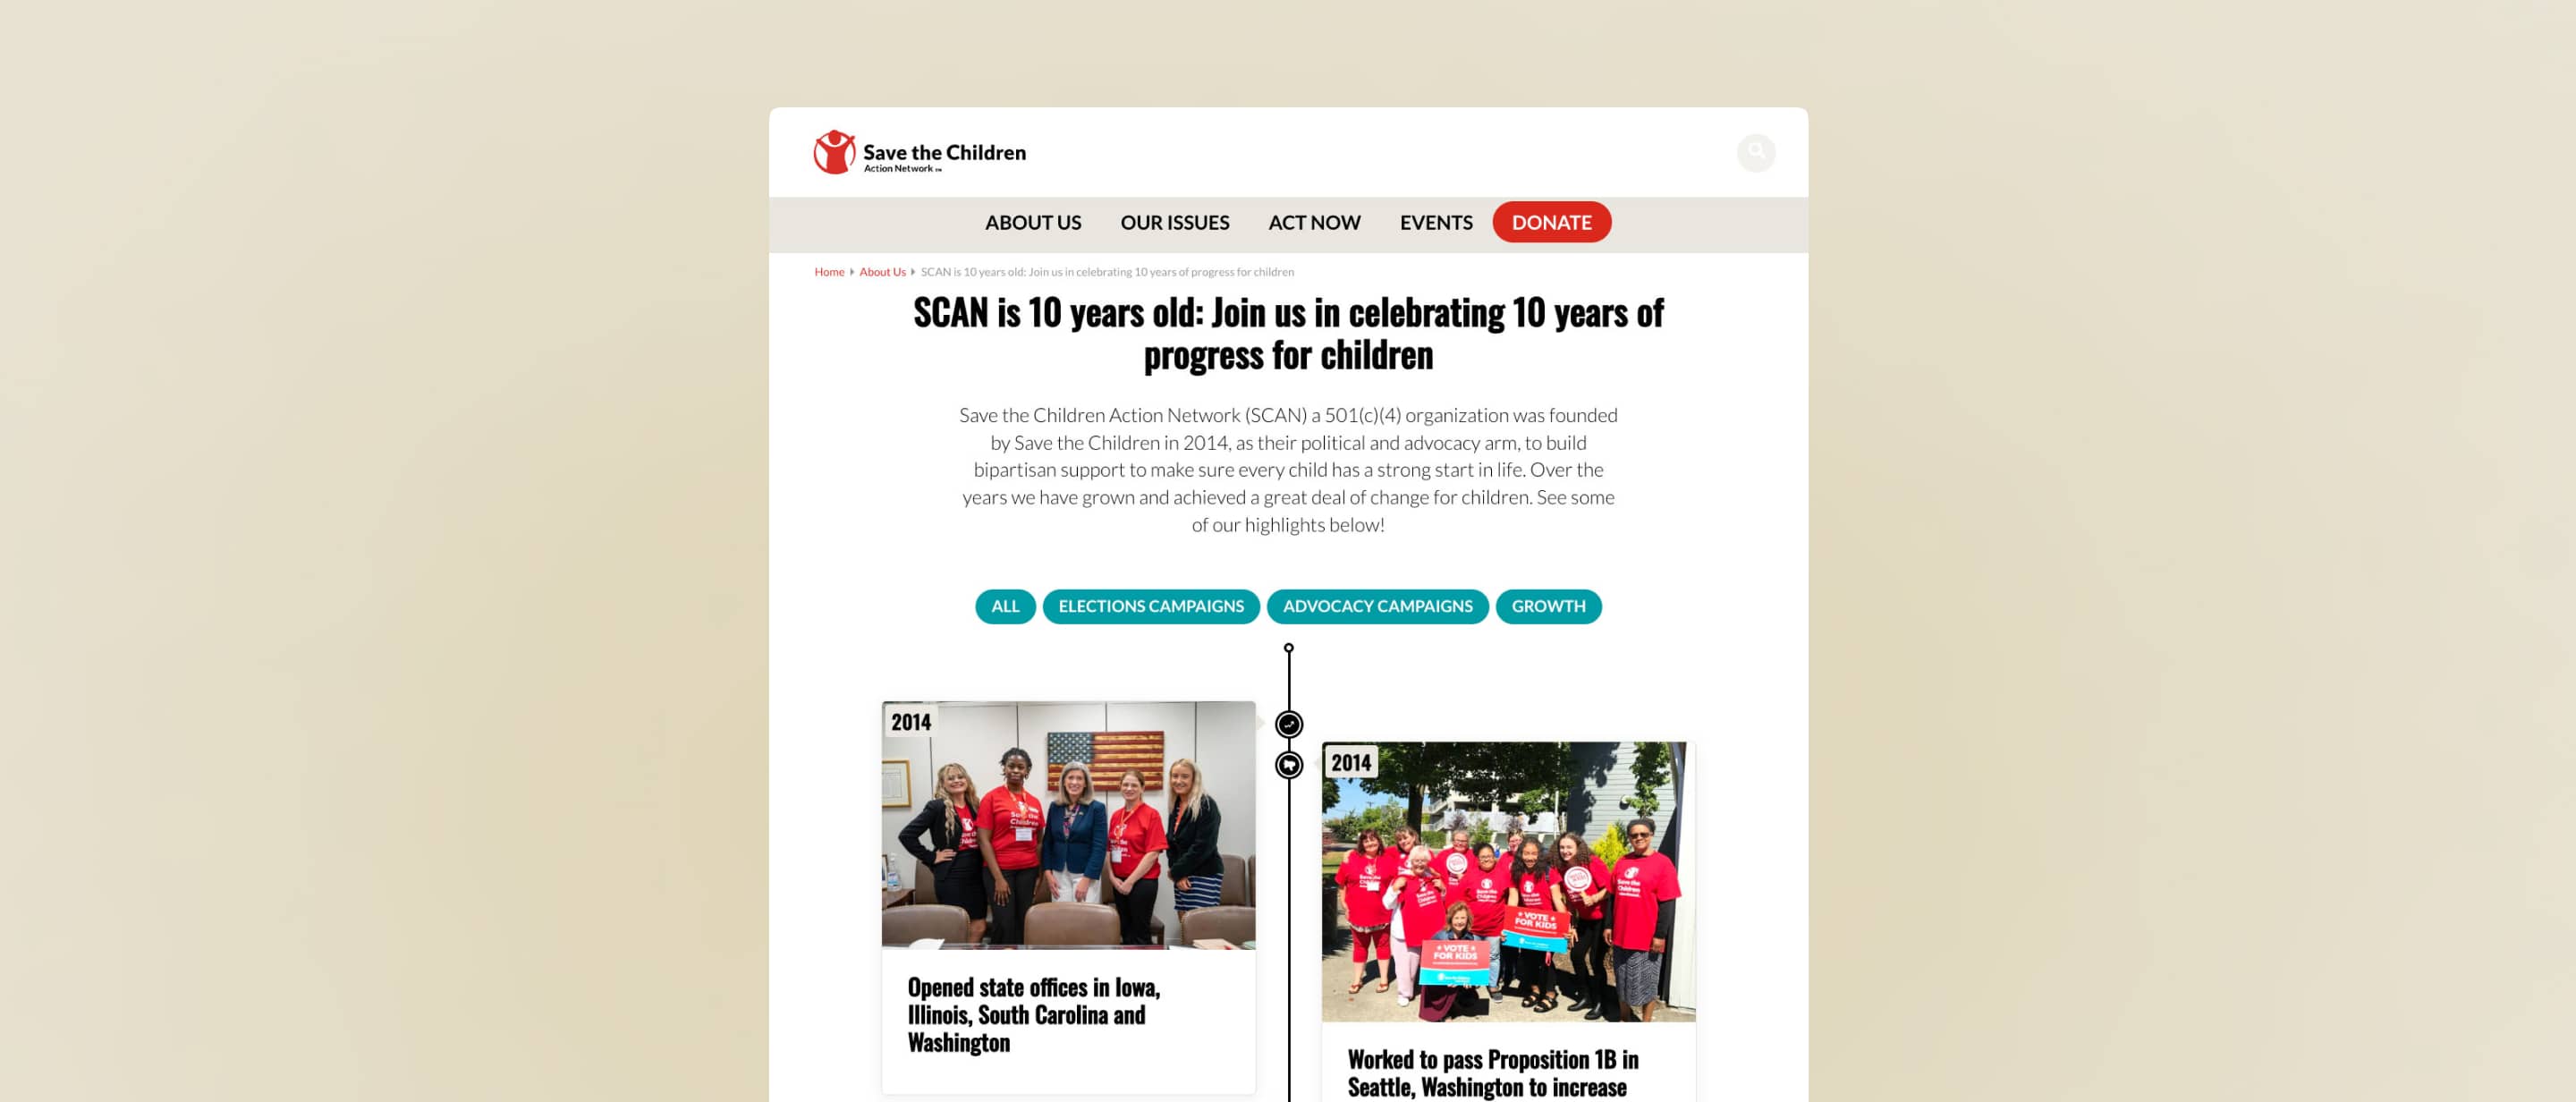 Save the Children Action Network